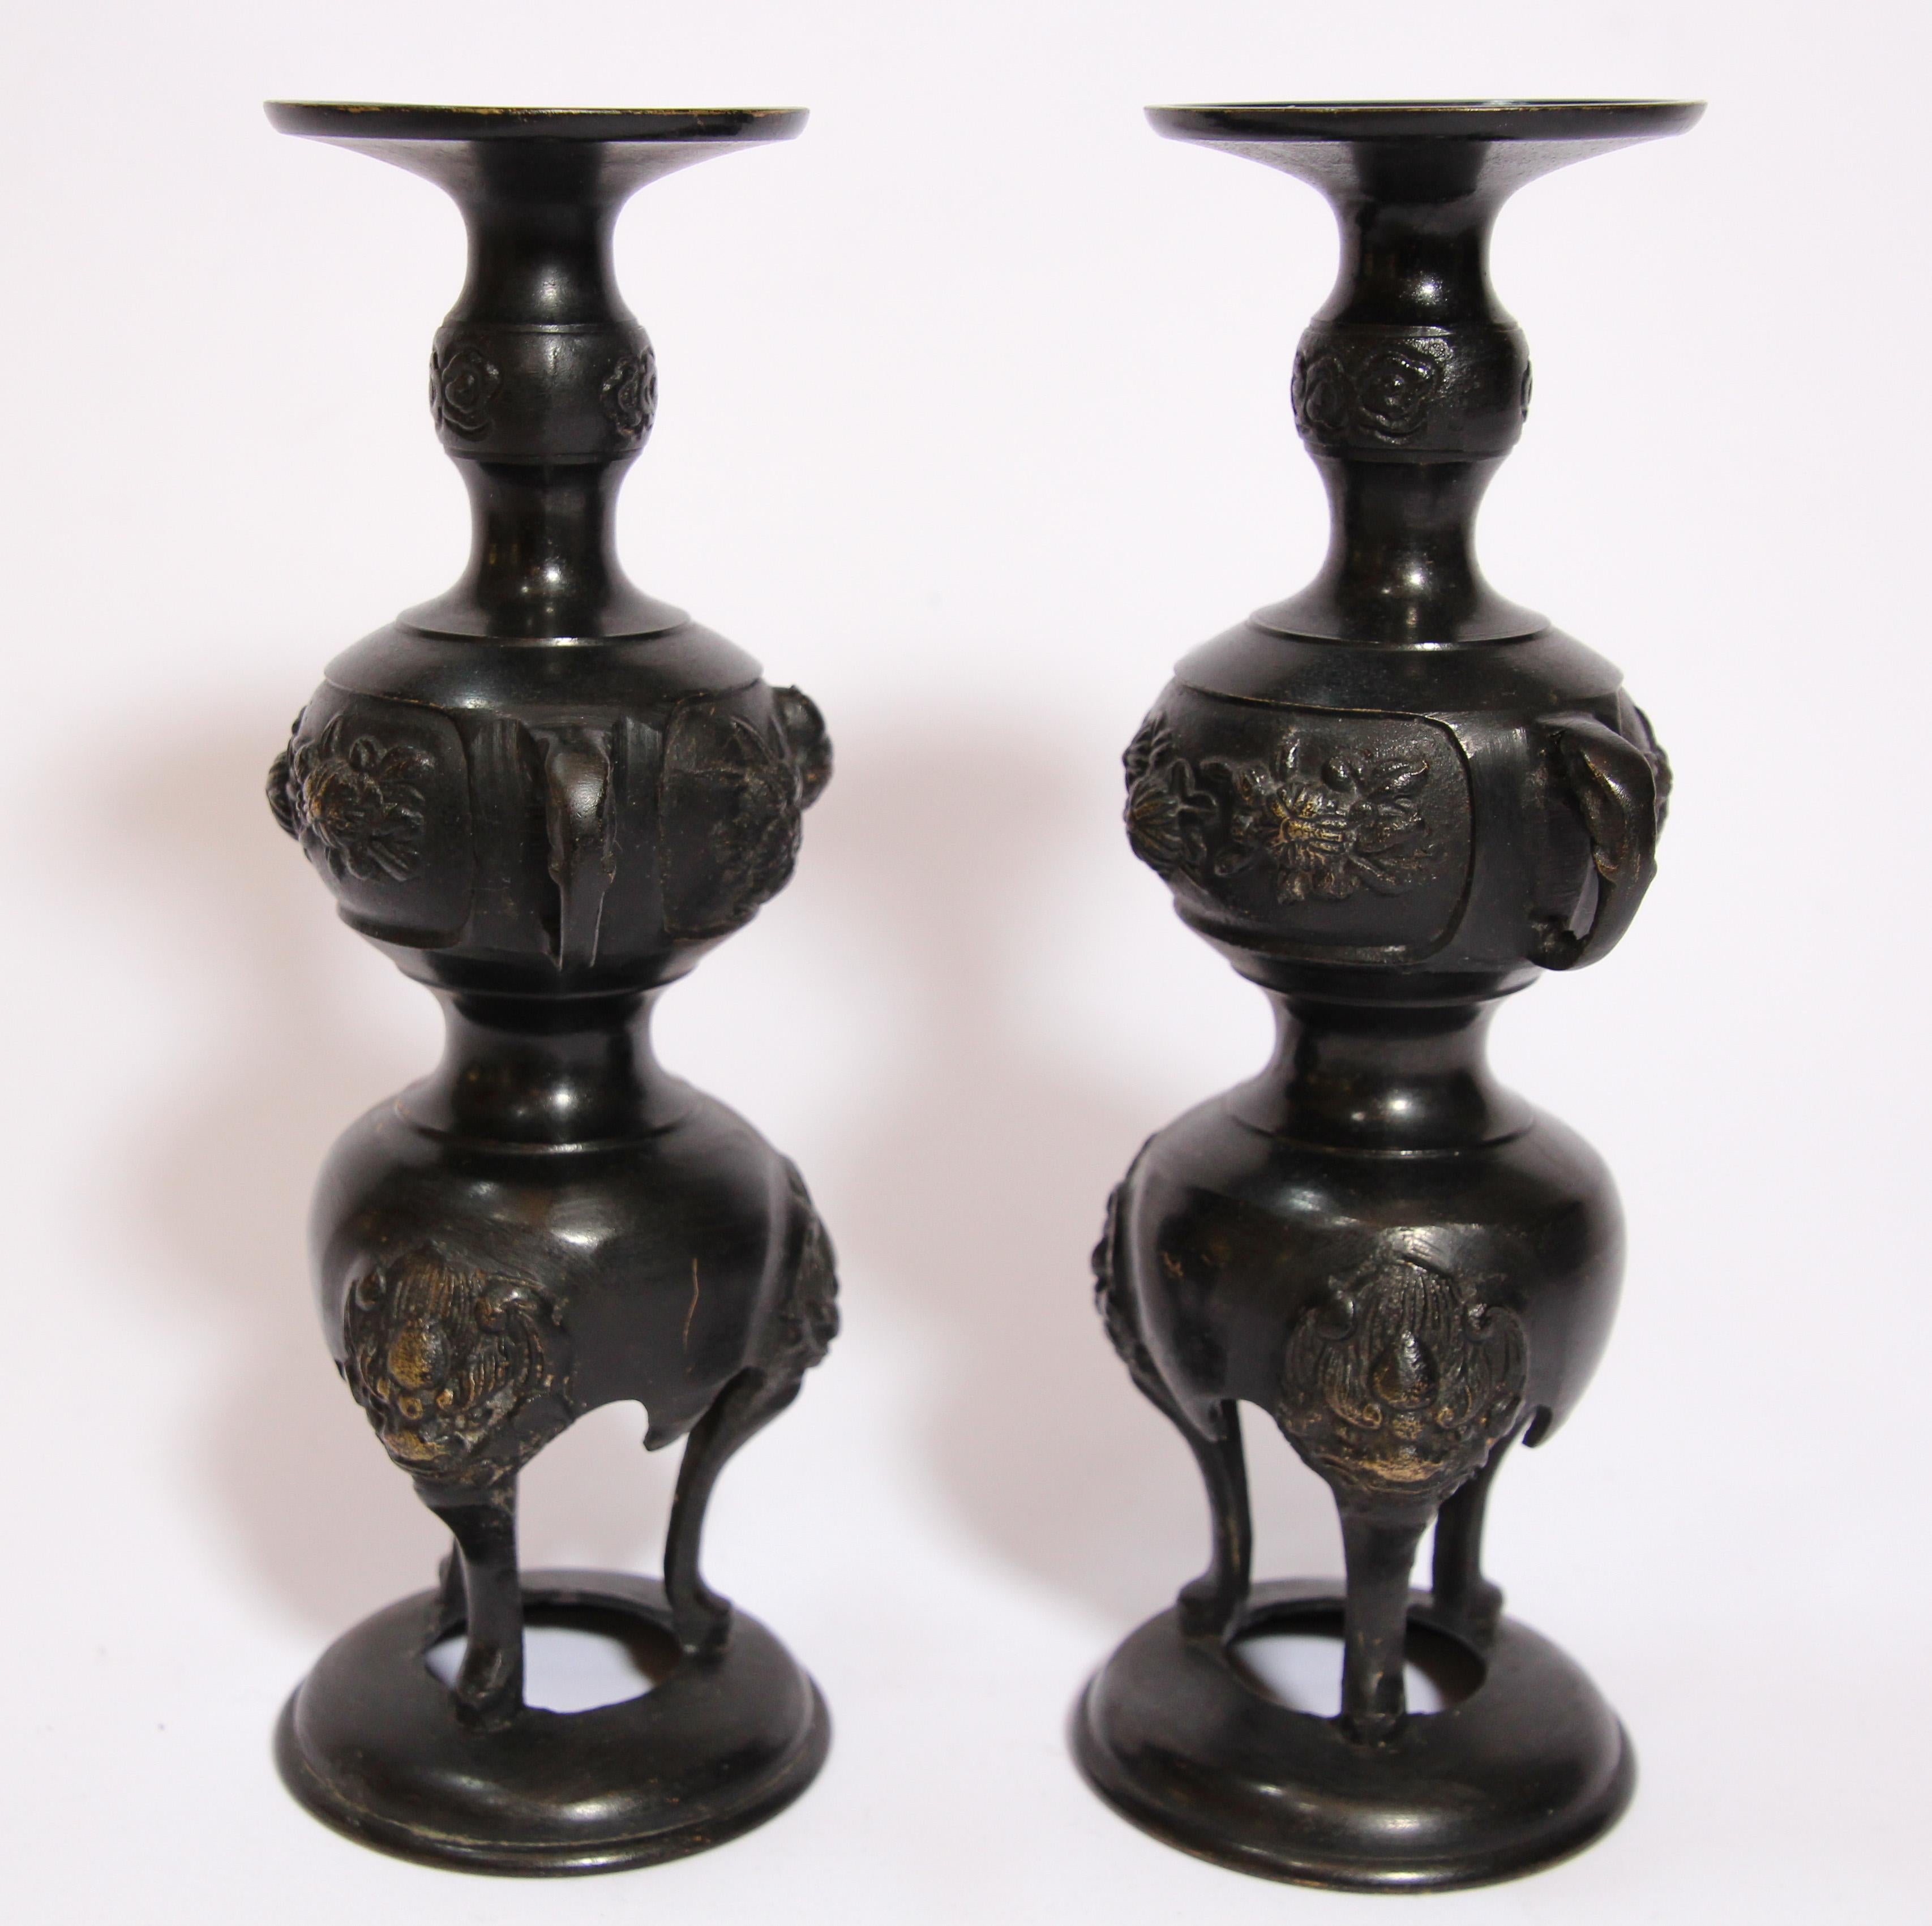 bronze candle holders